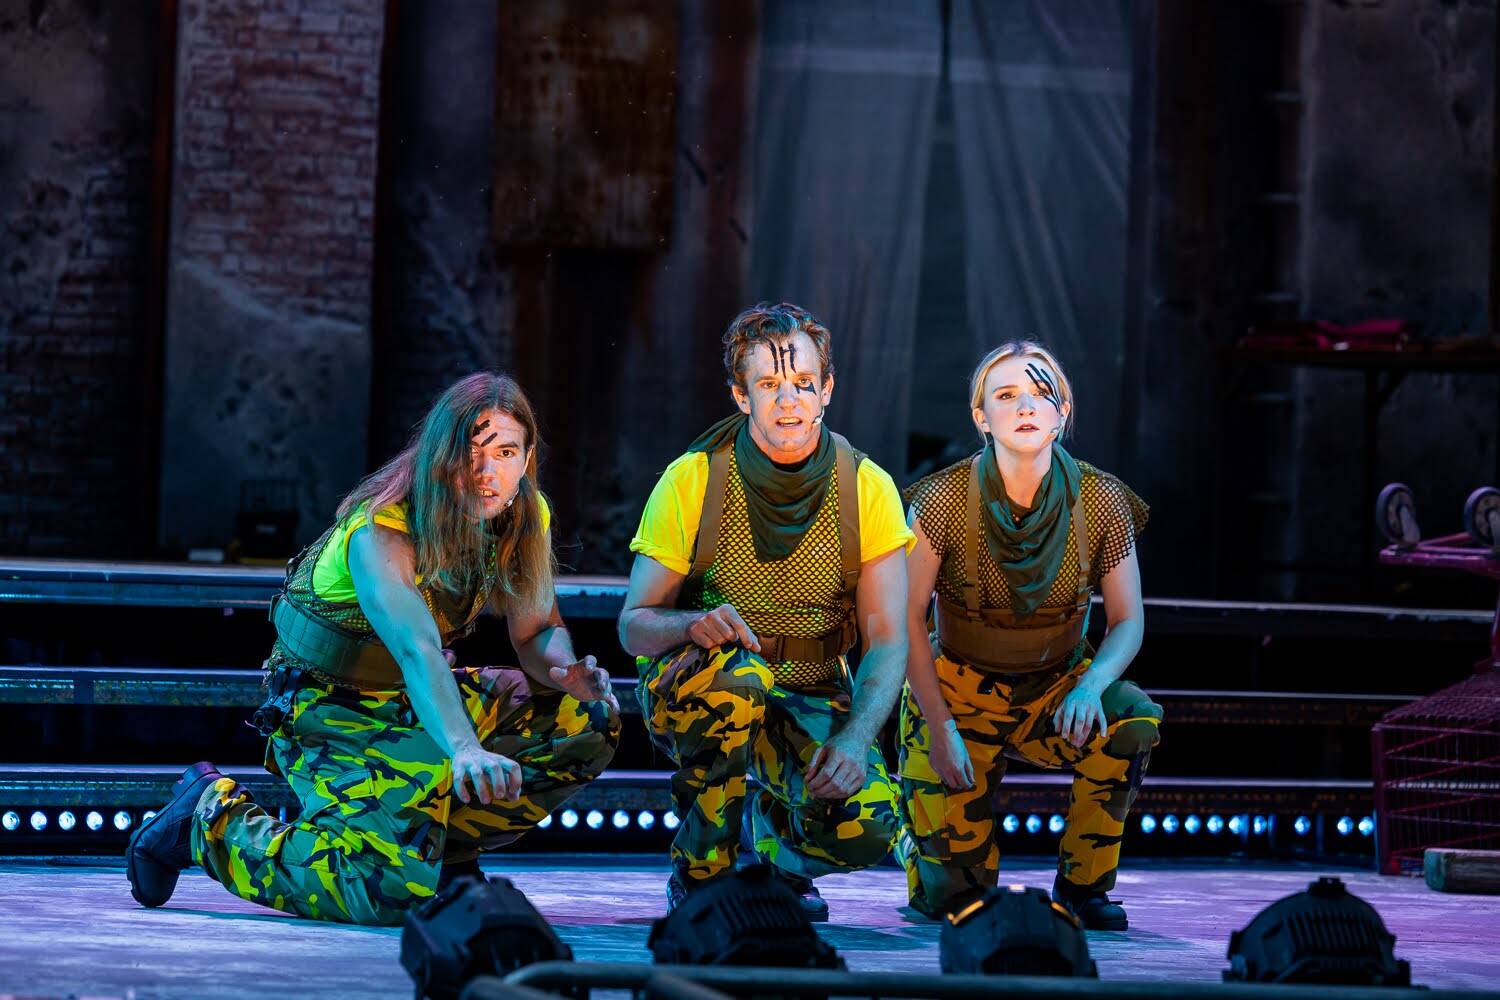 Jesse Hinson, John Blair and Annika Burley play the Witches in the Commonwealth Shakespeare Company's production of "Macbeth." (Courtesy Nile Scott Studios)